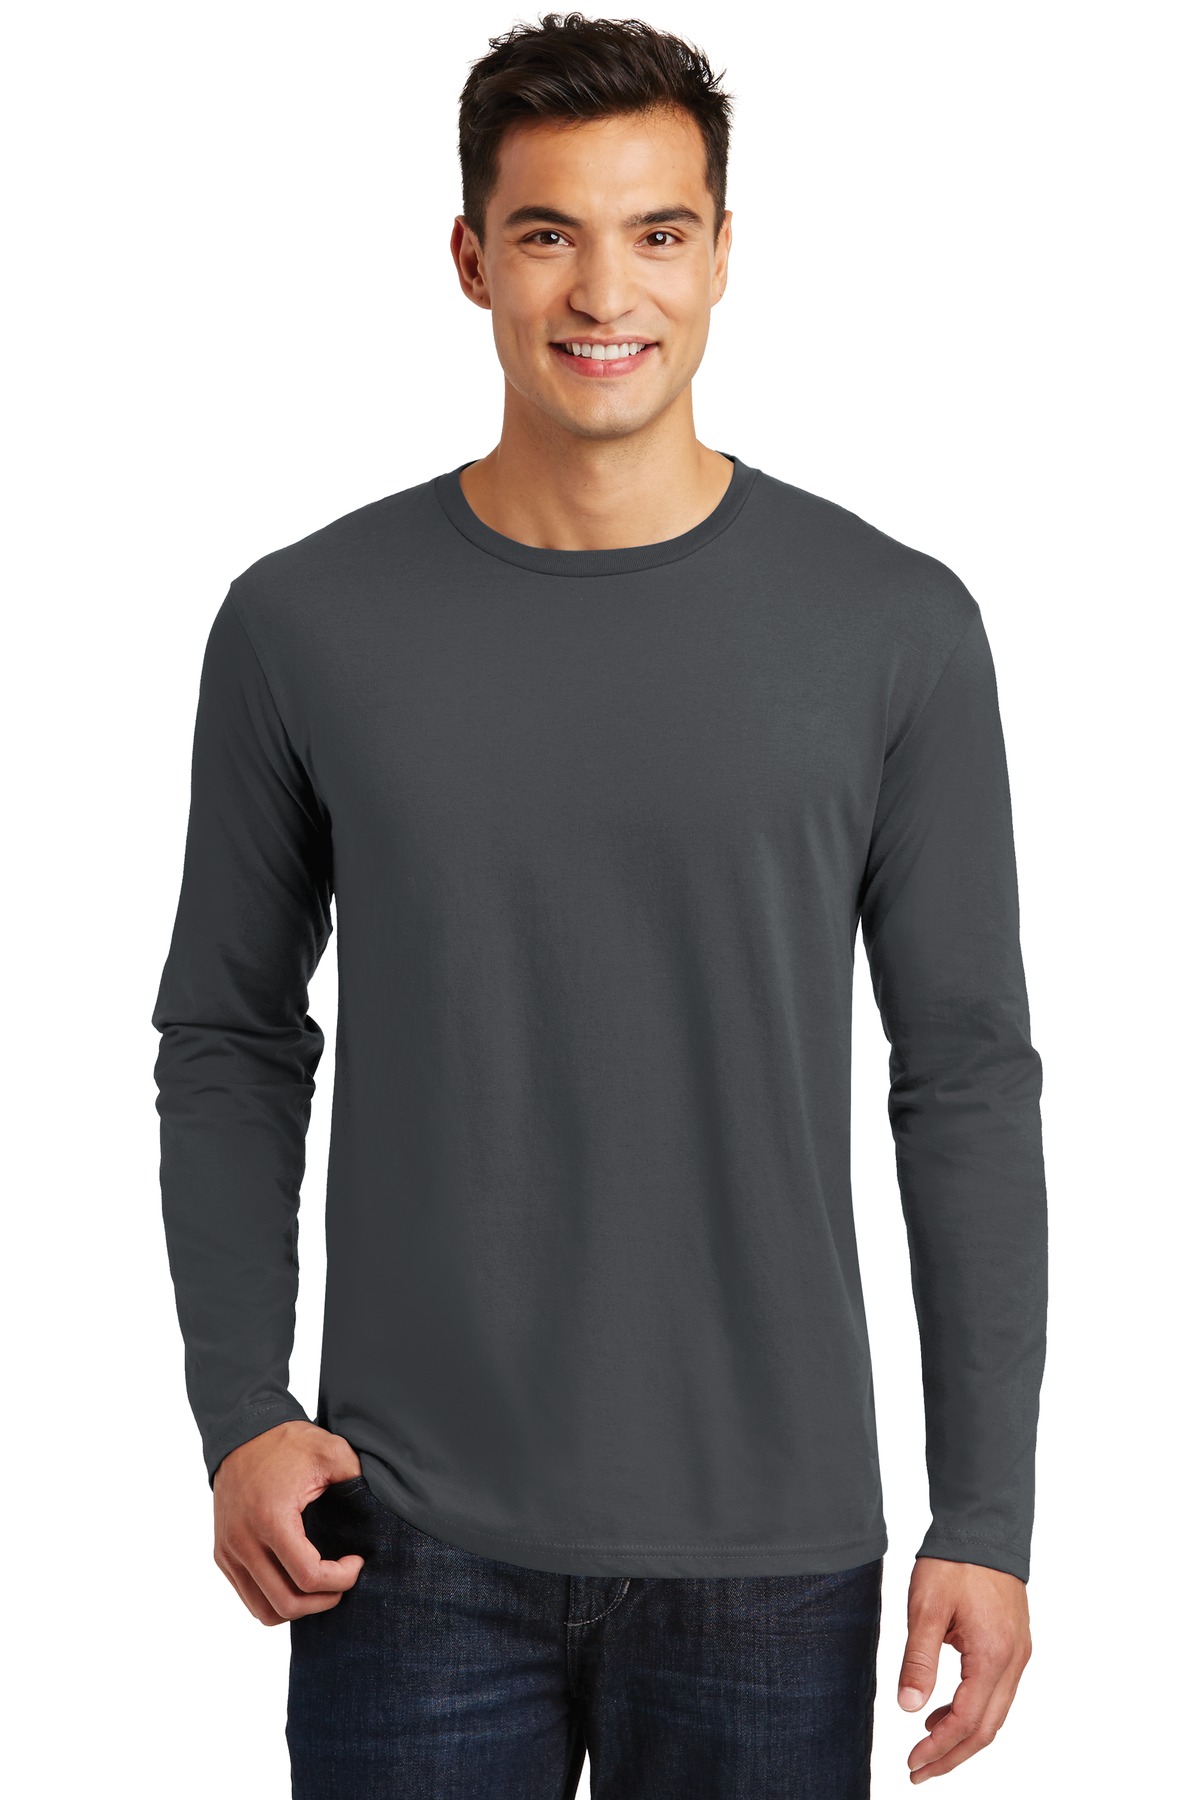 District  Perfect Weight Long Sleeve Tee. DT105